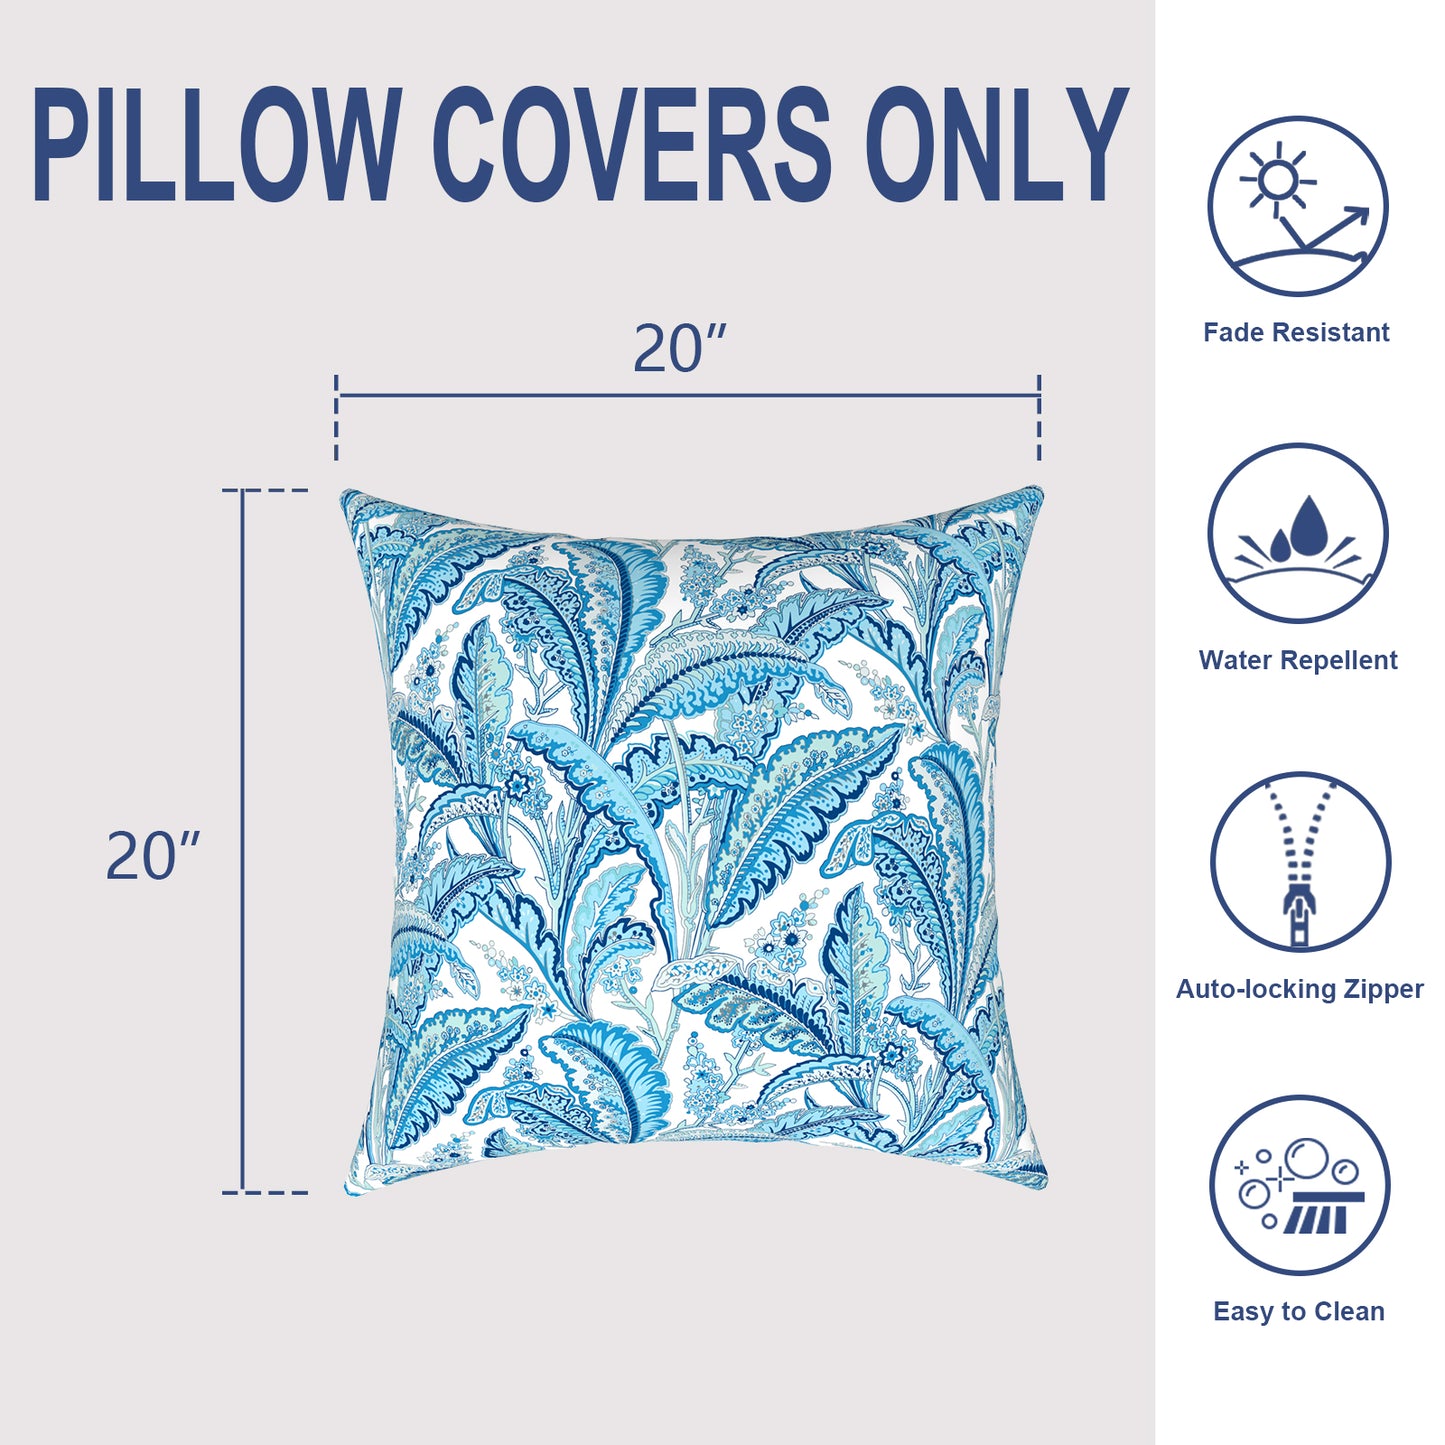 Melody Elephant Pack of 2 Patio Throw Pillow Covers ONLY, Water Repellent Cushion Cases 20x20 Inch, Square Pillowcases for Outdoor Couch Decoration, Monotone Leaves Blue